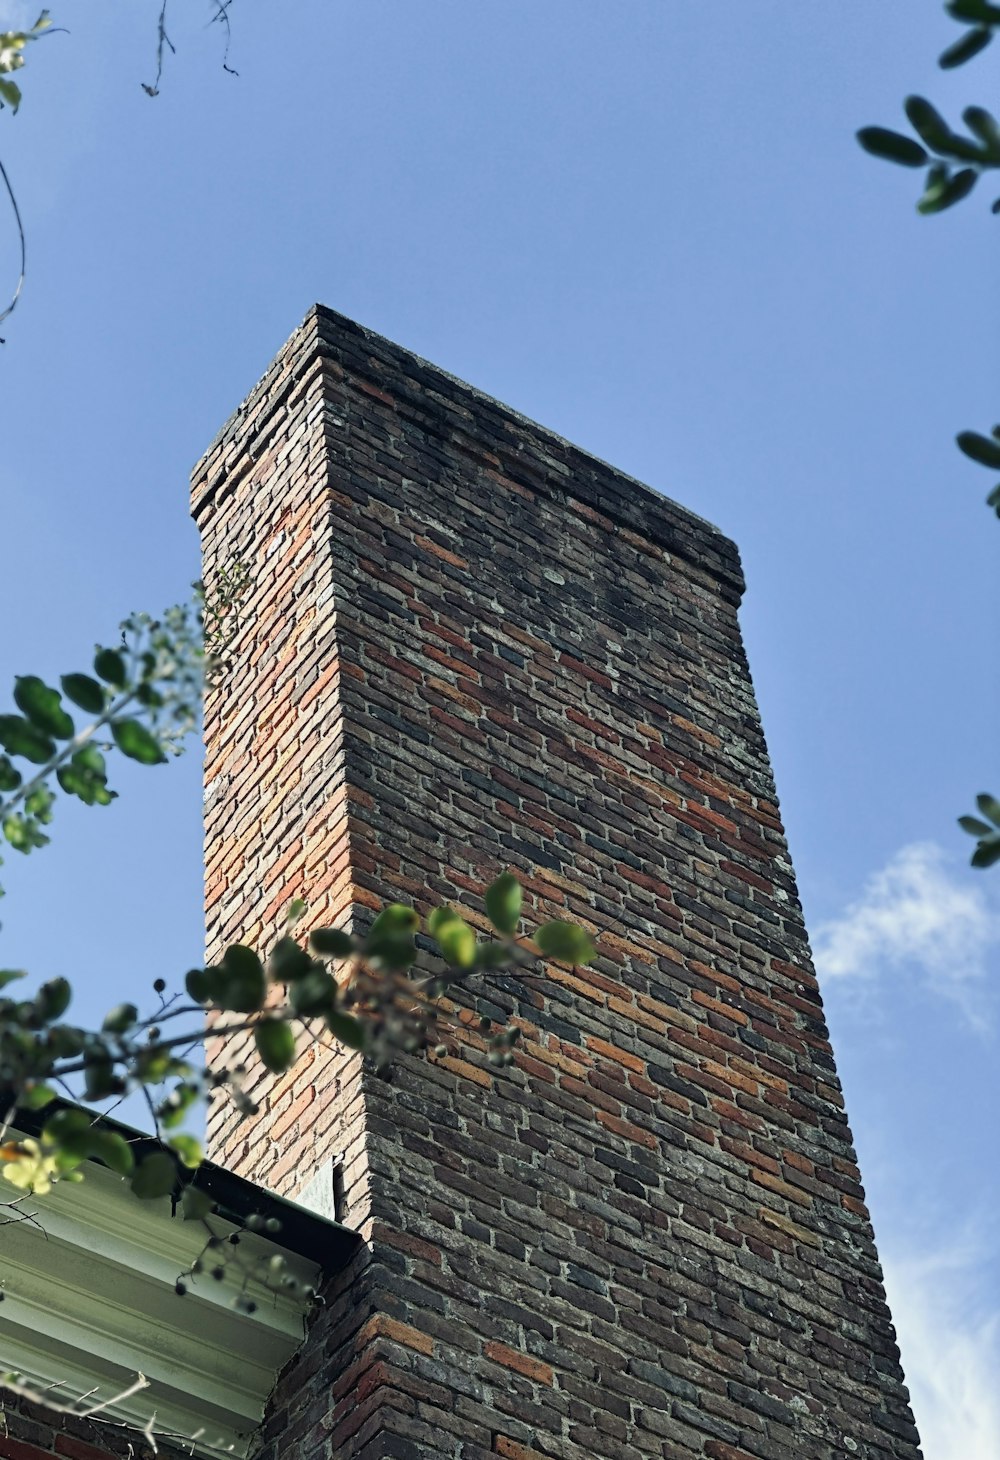 a tall brick chimney on top of a building